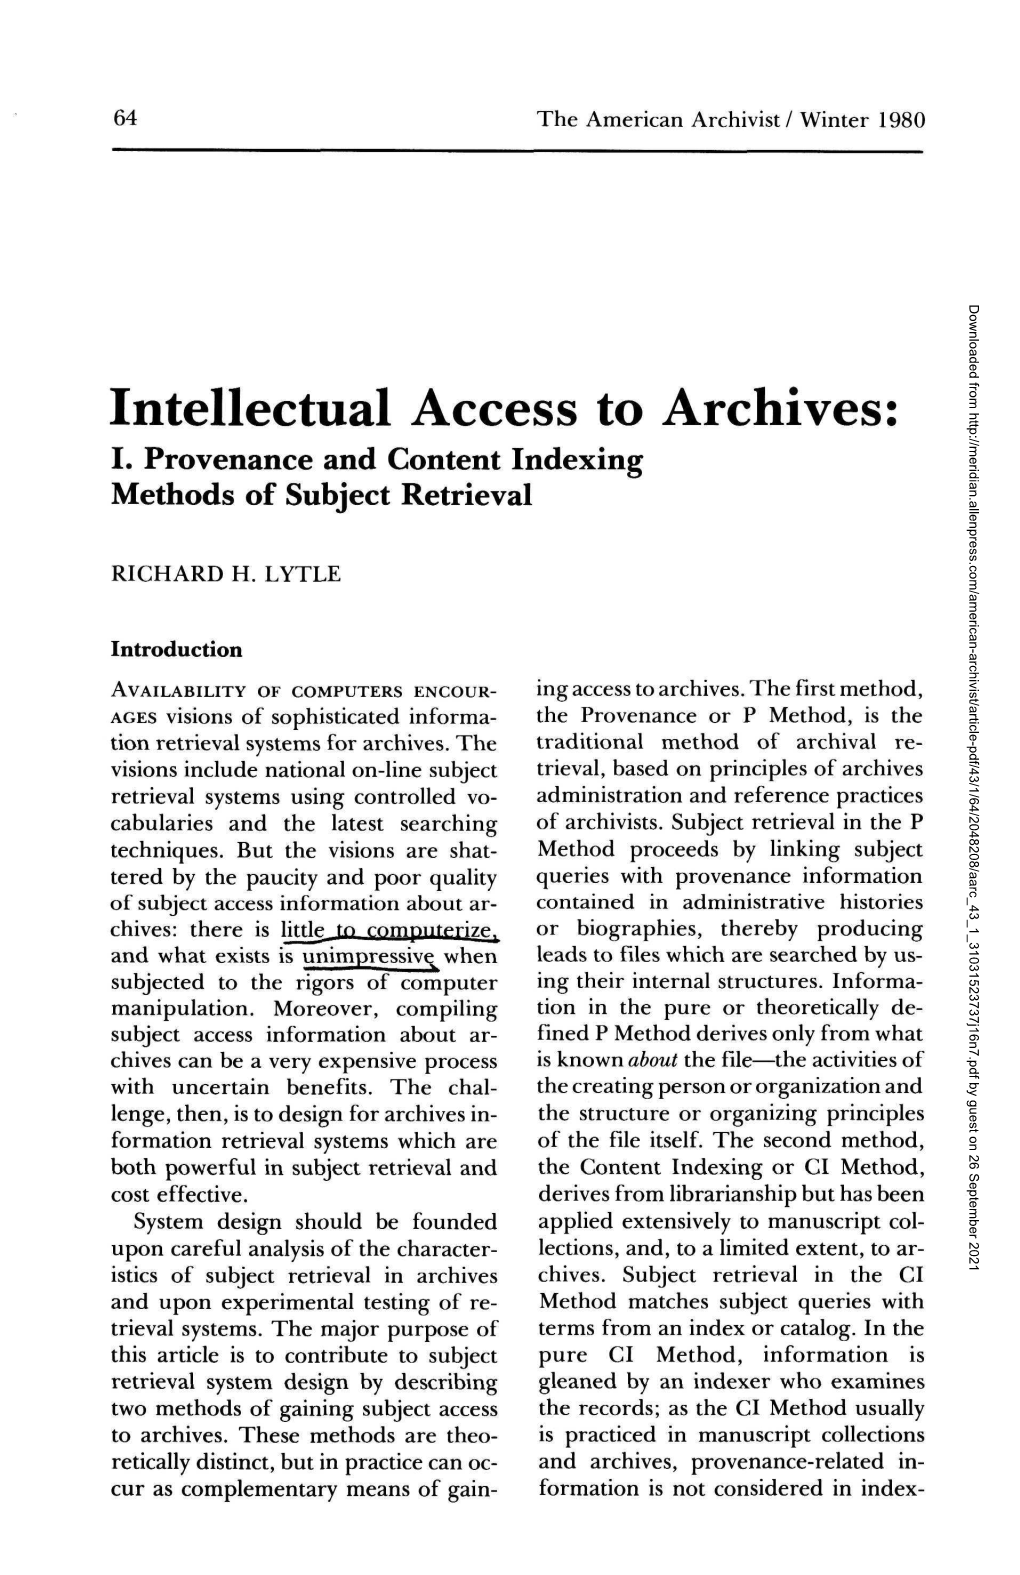 Intellectual Access to Archives: I